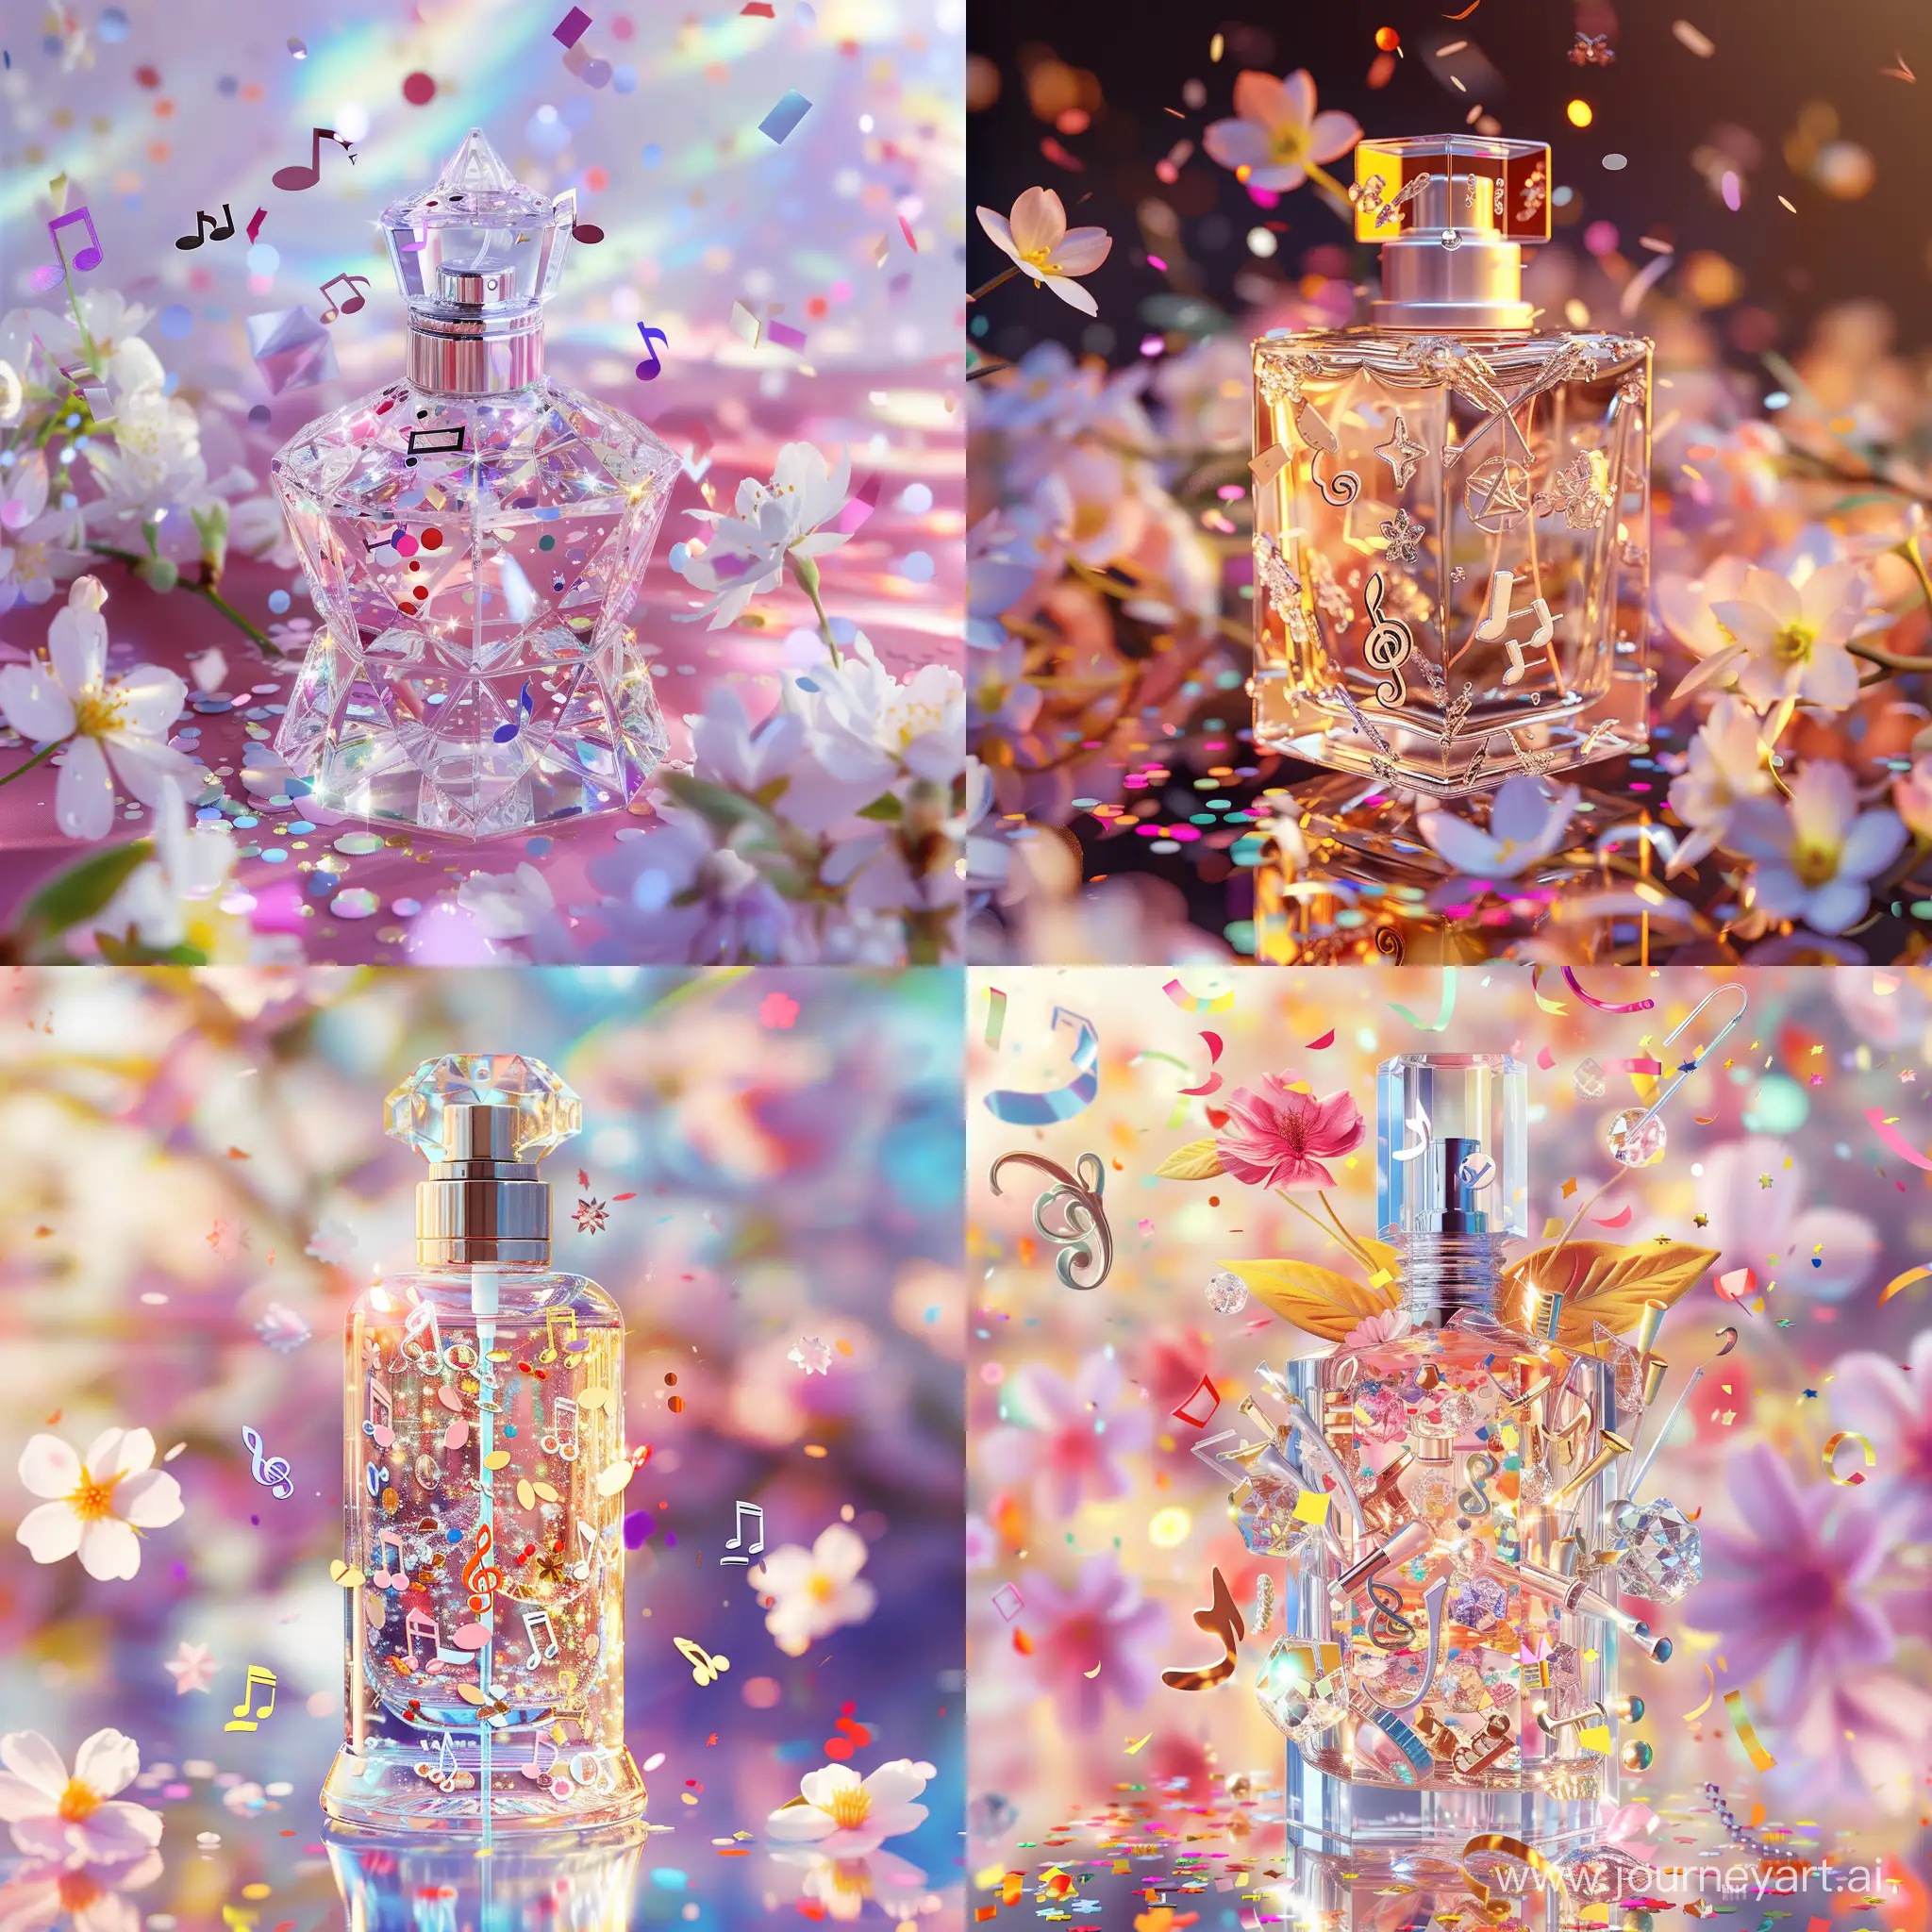 holographic shimmer, high quality, 8K Ultra HD, many symbols of musical notes and instruments inside a crystal perfume bottle from yukisakura, high detail, early spring flowers, confetti, beautiful background